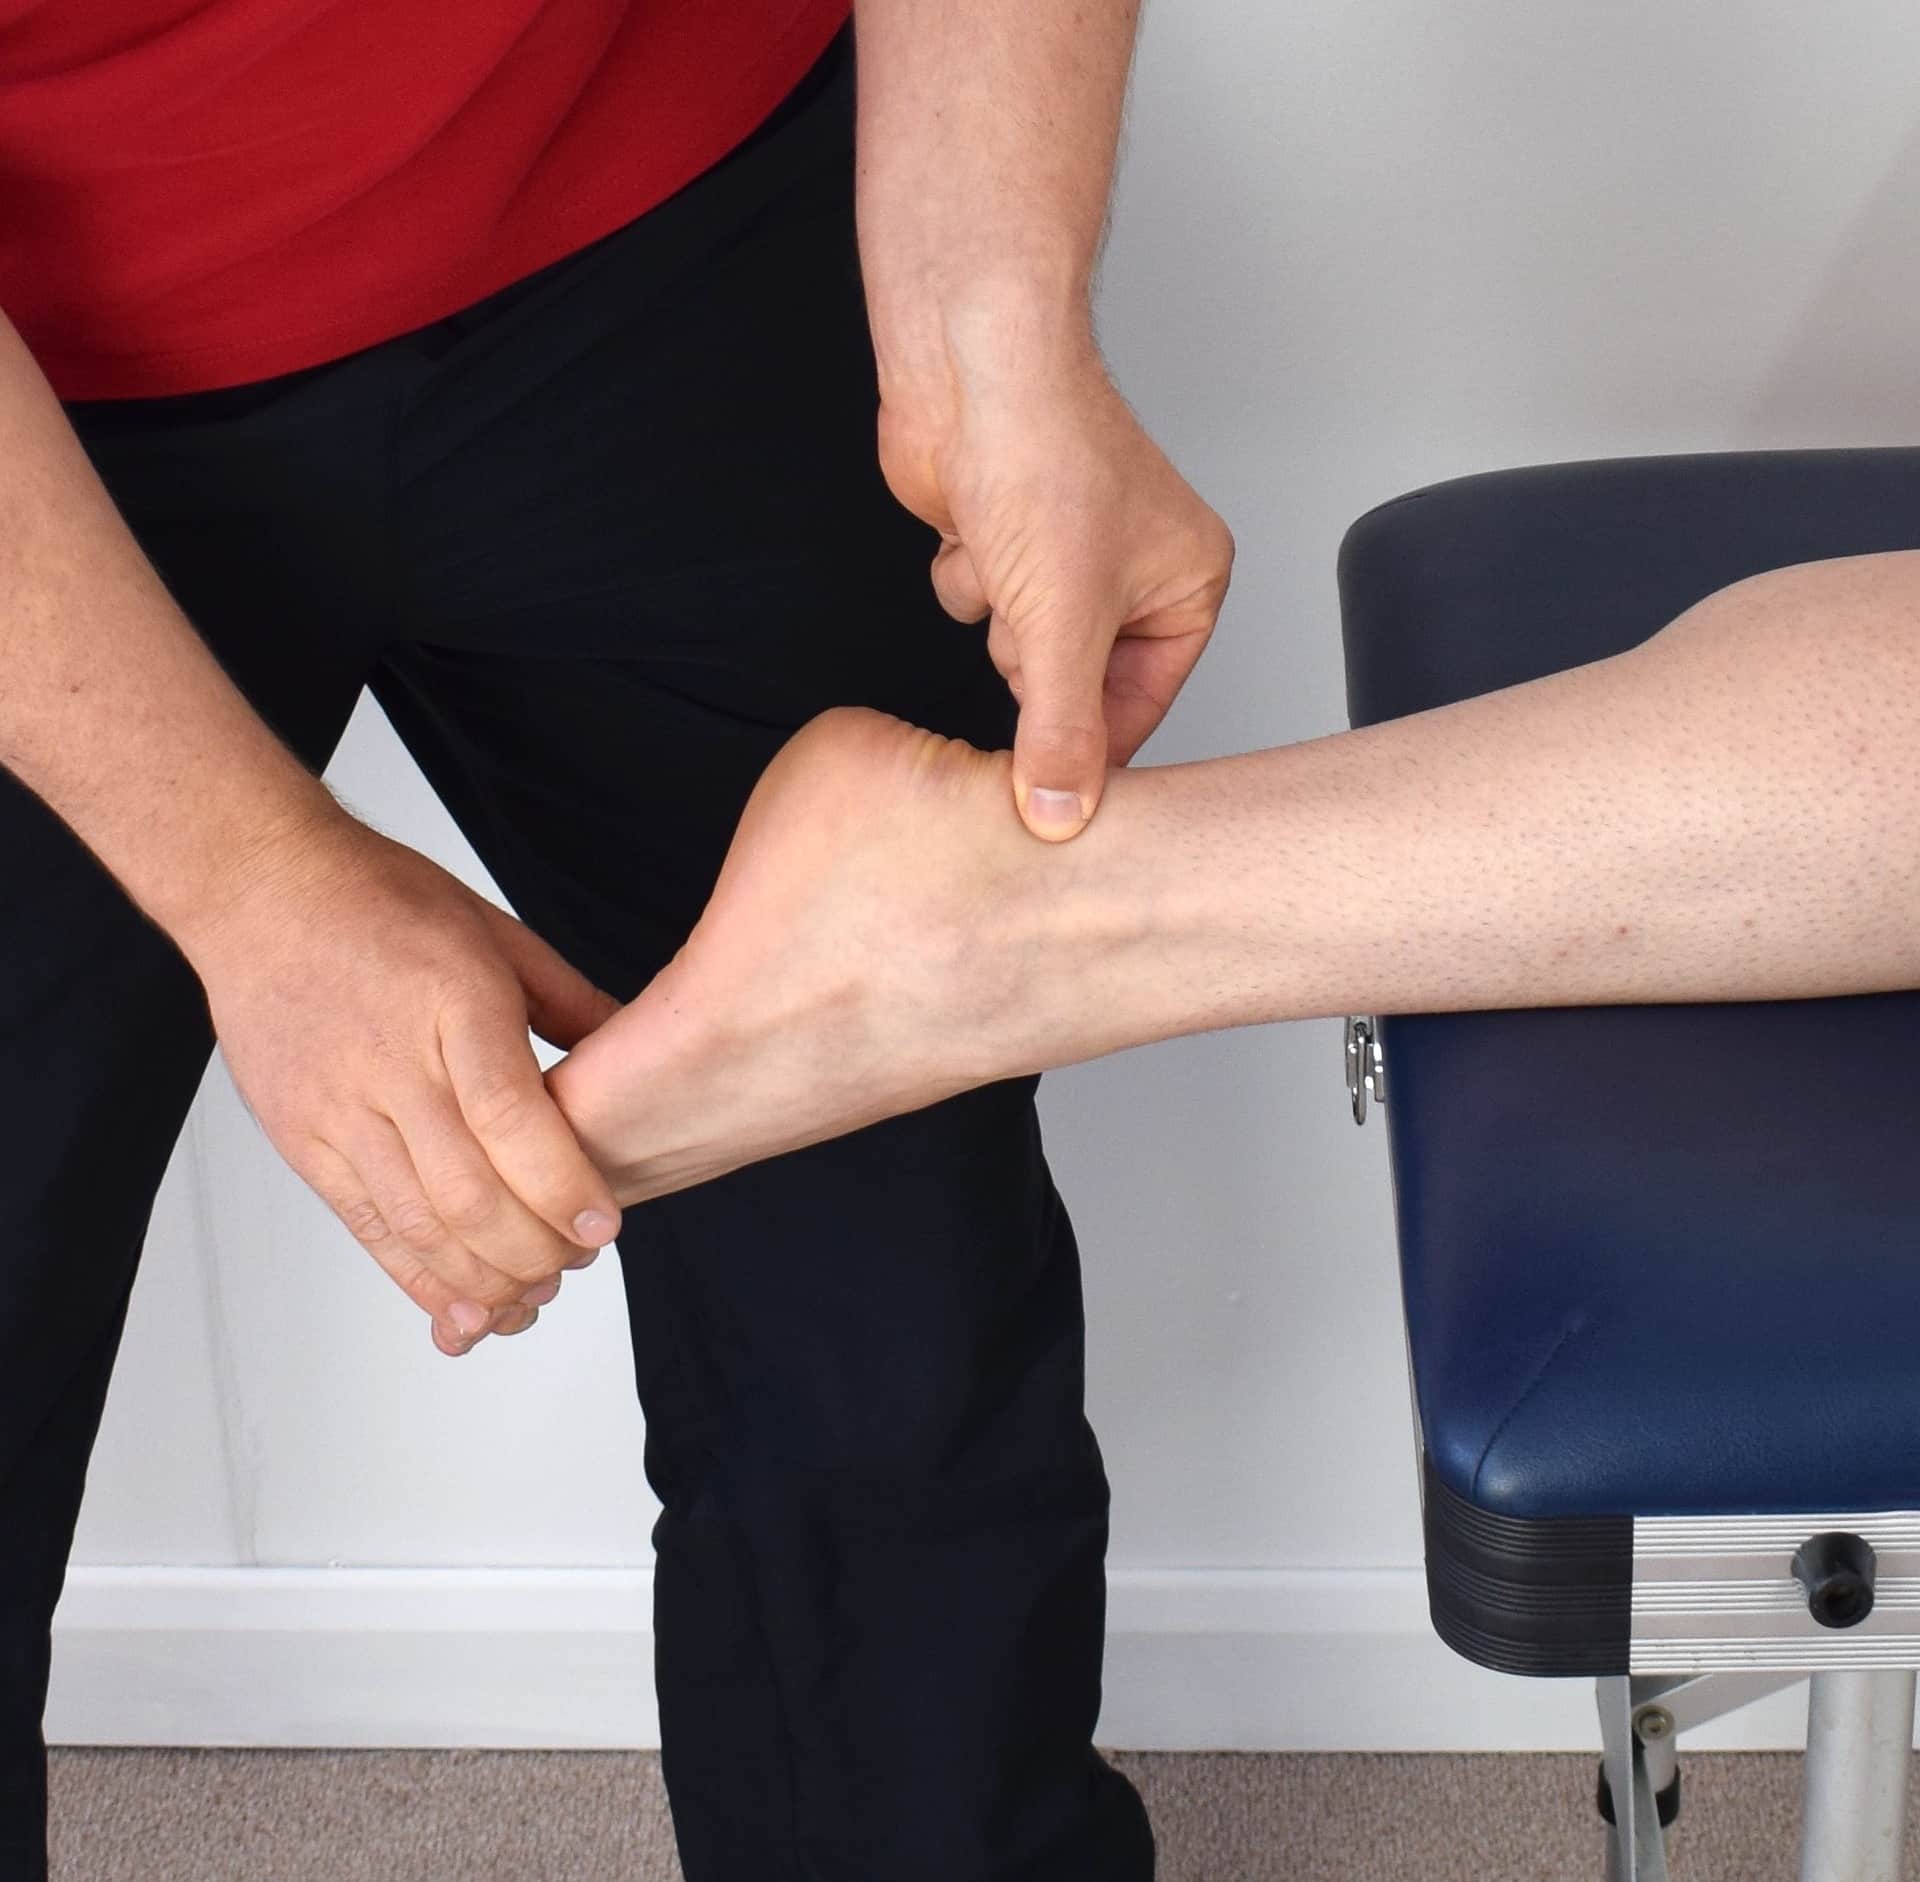 Therapist treating a patient with an ankle sprain. Seeking professional help is one of the key steps to coping with injury recovery setbacks.